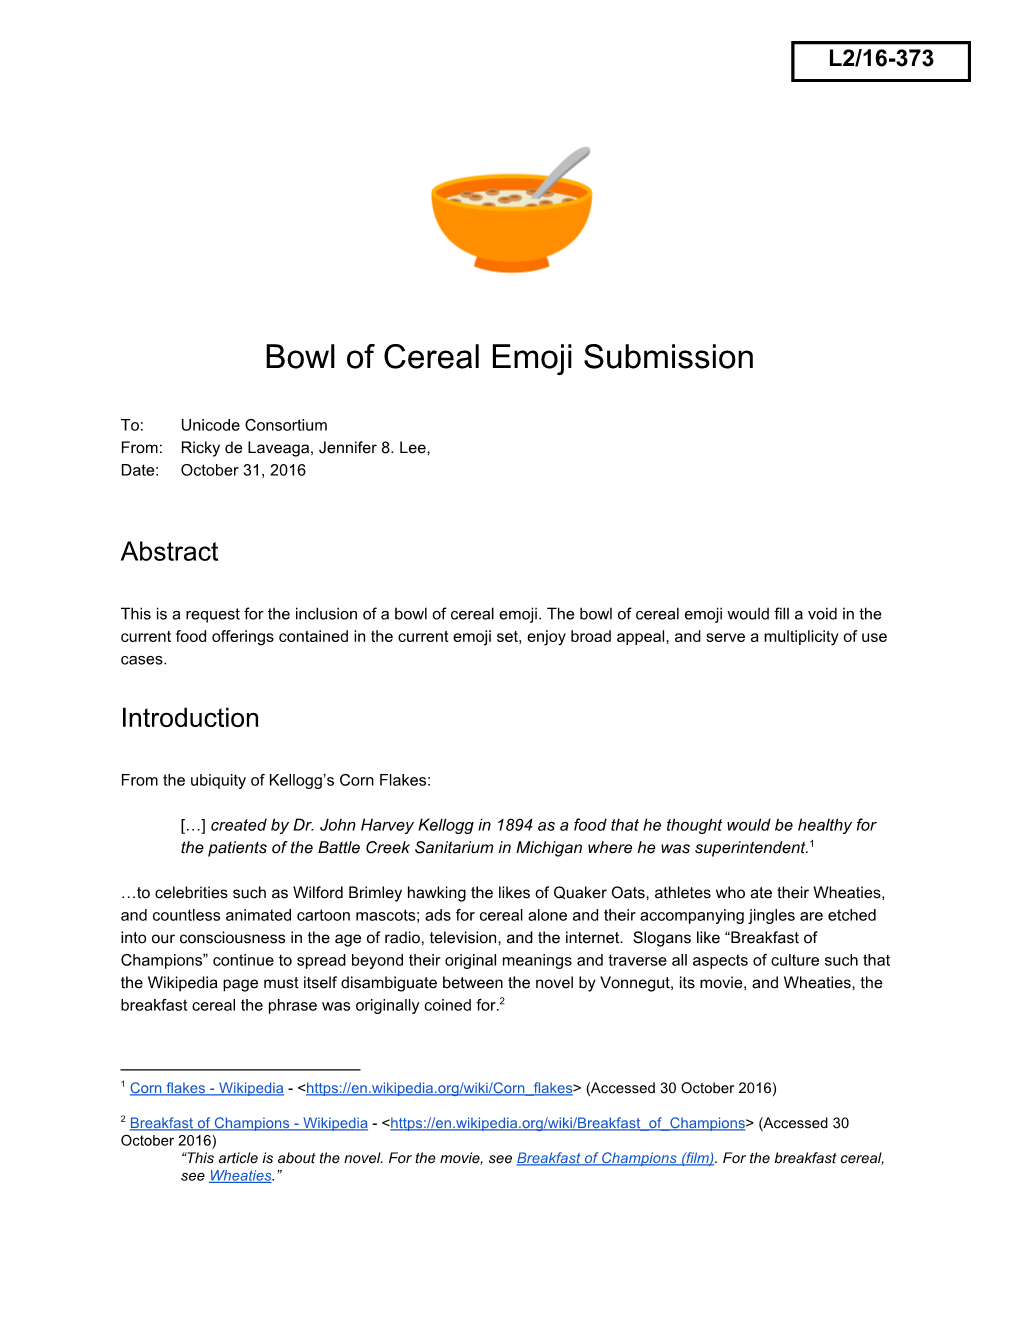 Bowl of Cereal Emoji Submission